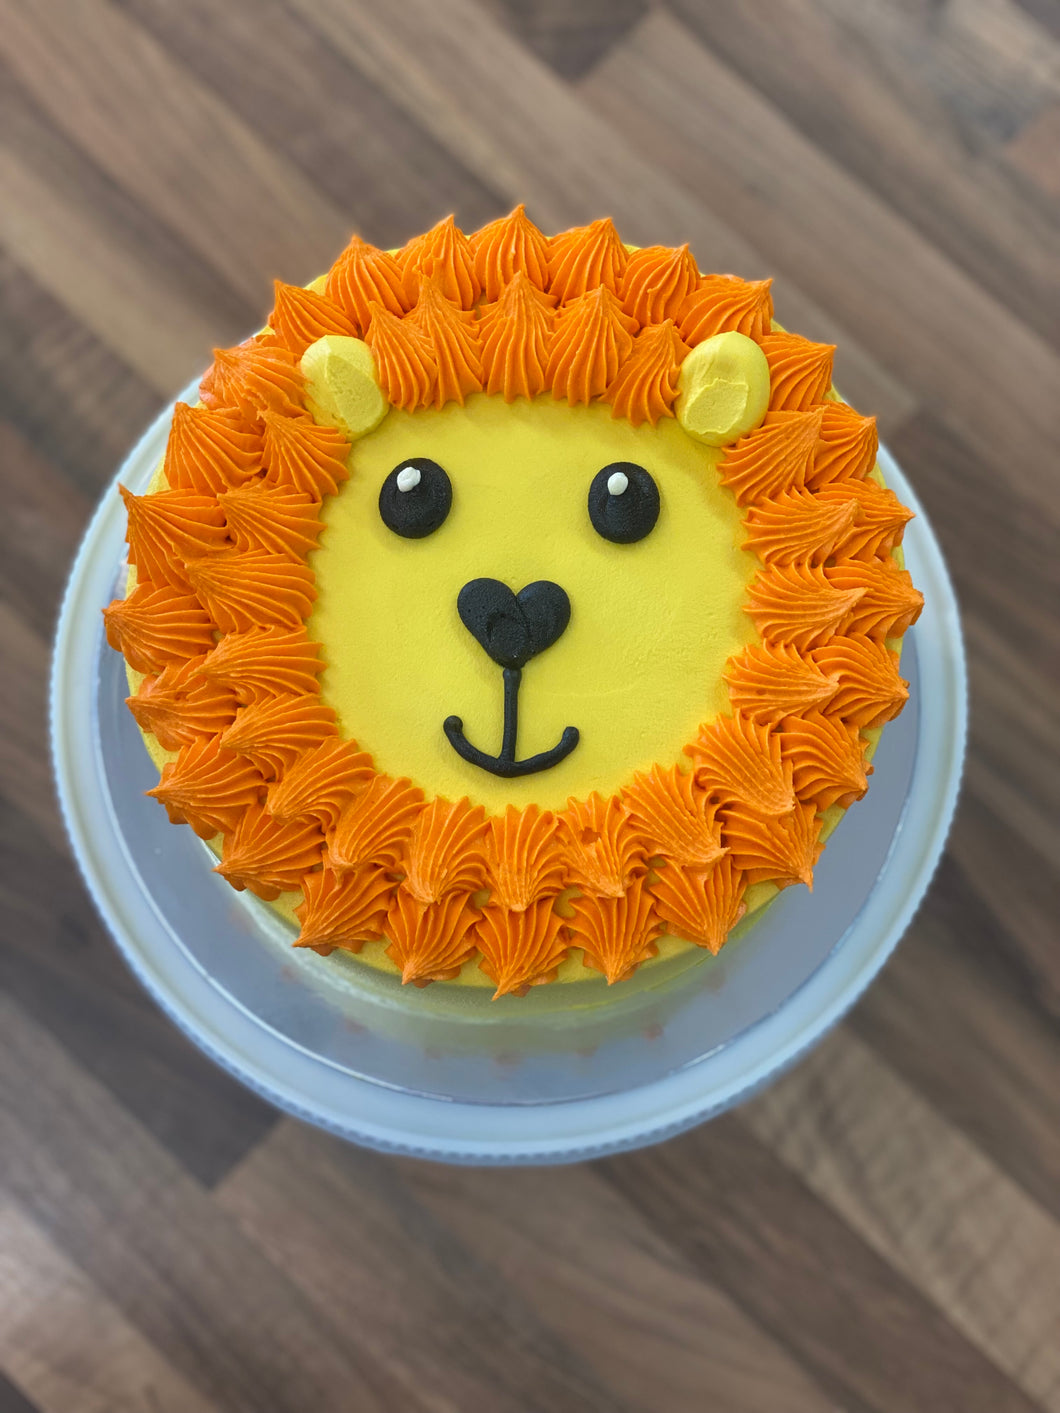 Feed My Paws SG - Handmade Dog Birthday Cake - Custom Face - Singapore  Delivery - Since 2013 - Order Now